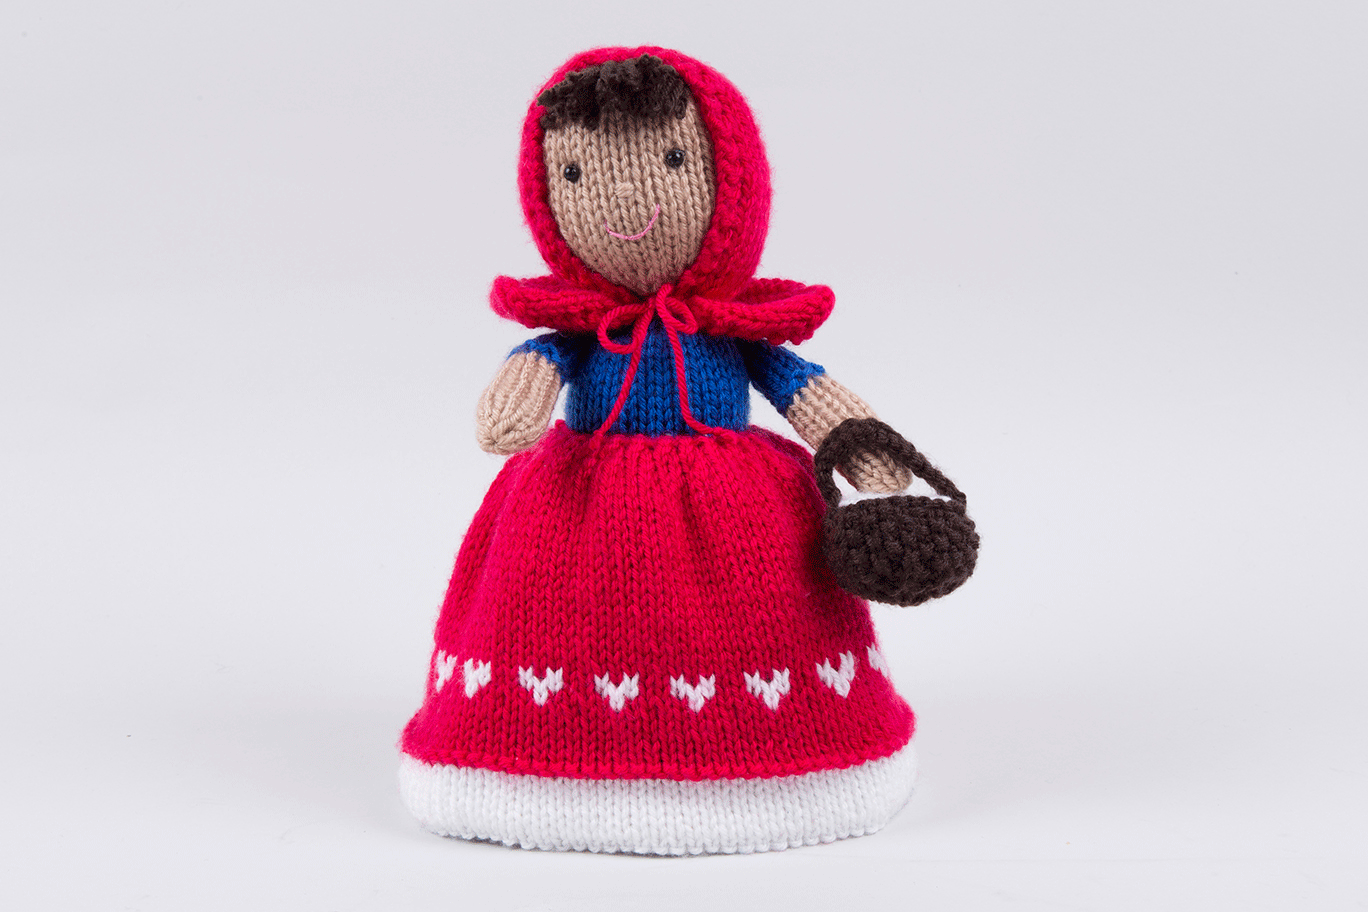 knitted topsy turvy doll